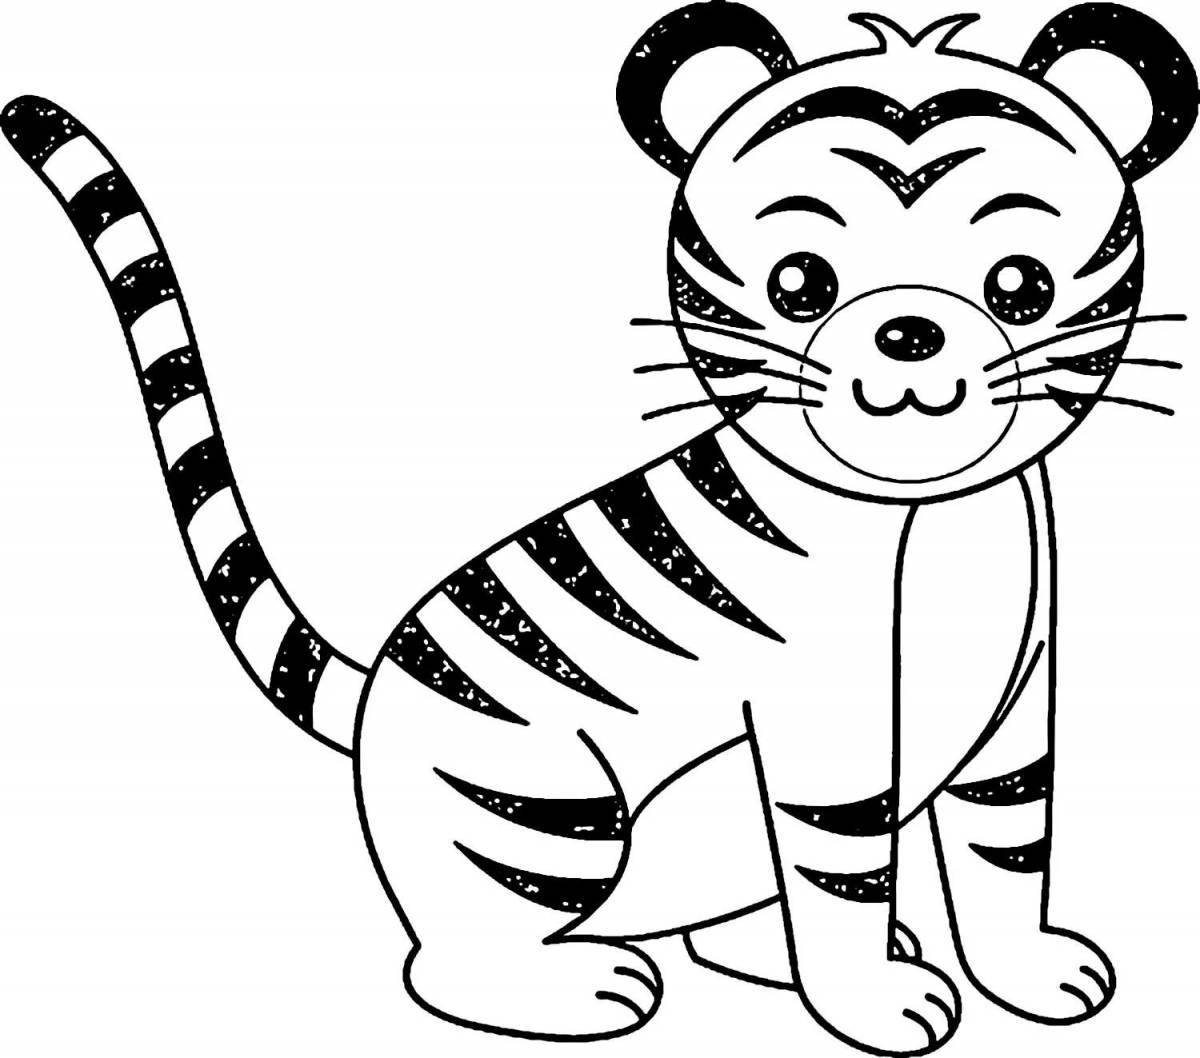 Irresistible tiger cub coloring for girls